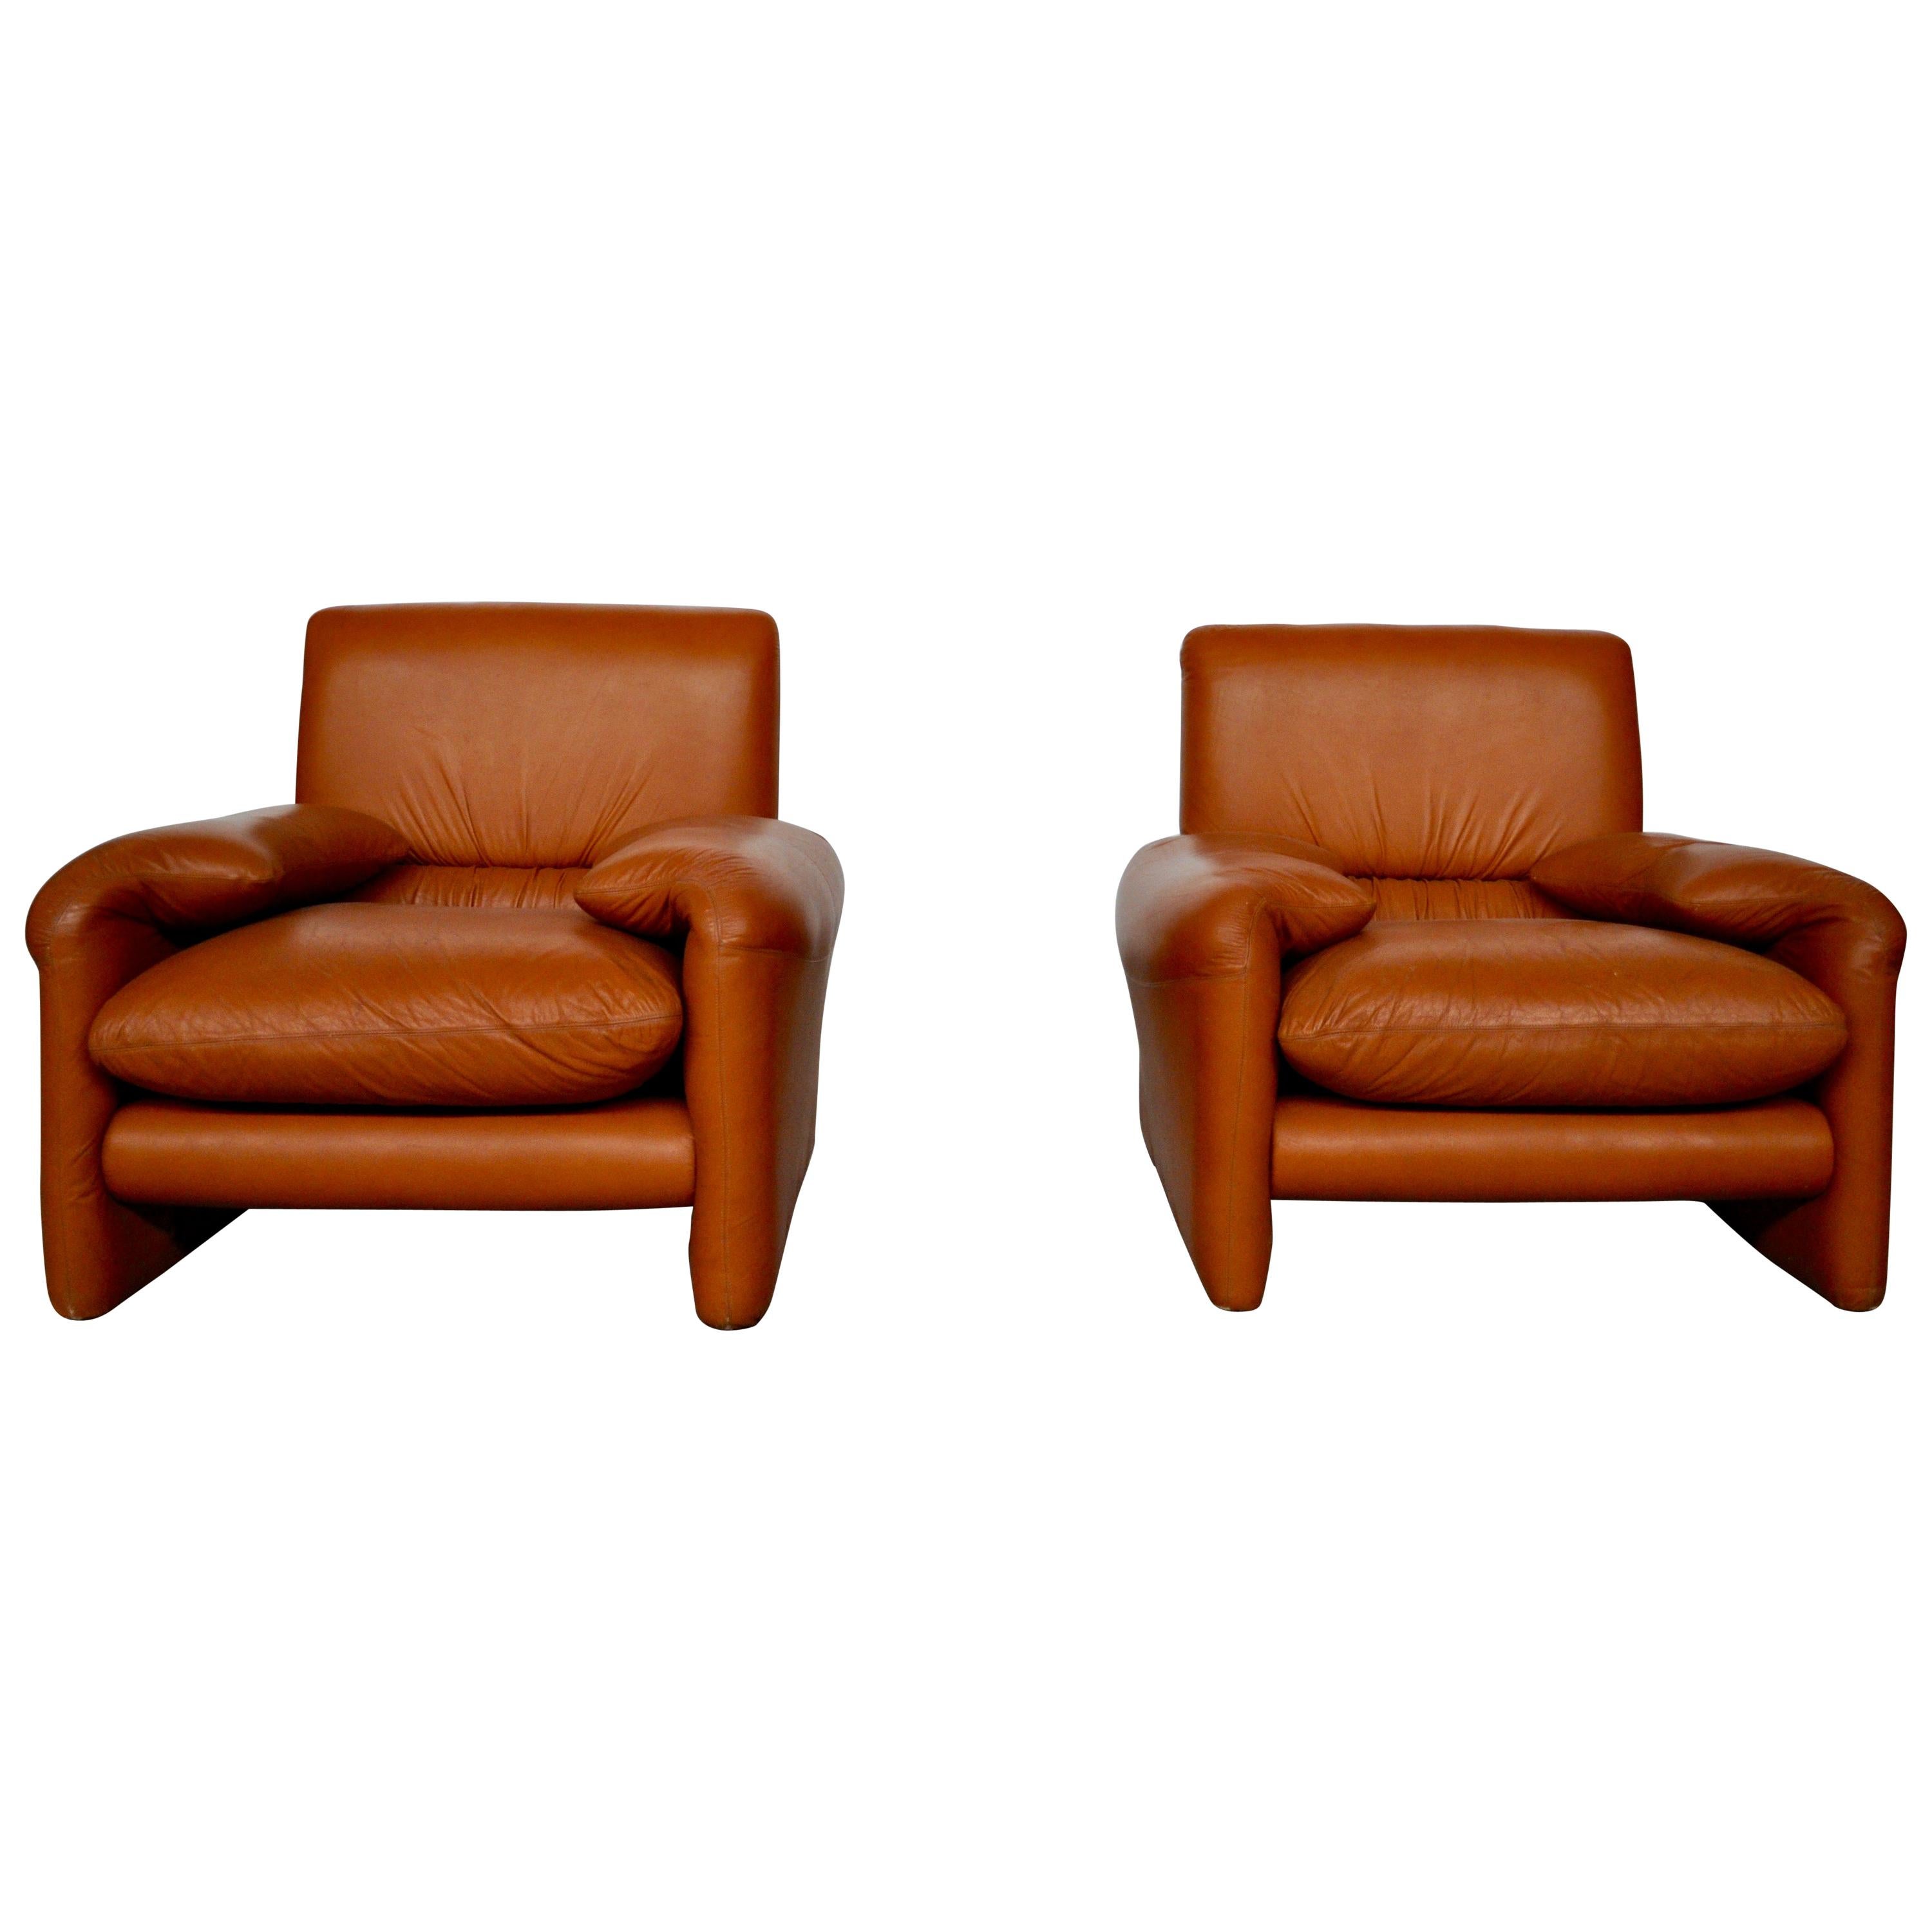 Set Sofa One Place in Cognac Leather, Italy 1970 For Sale